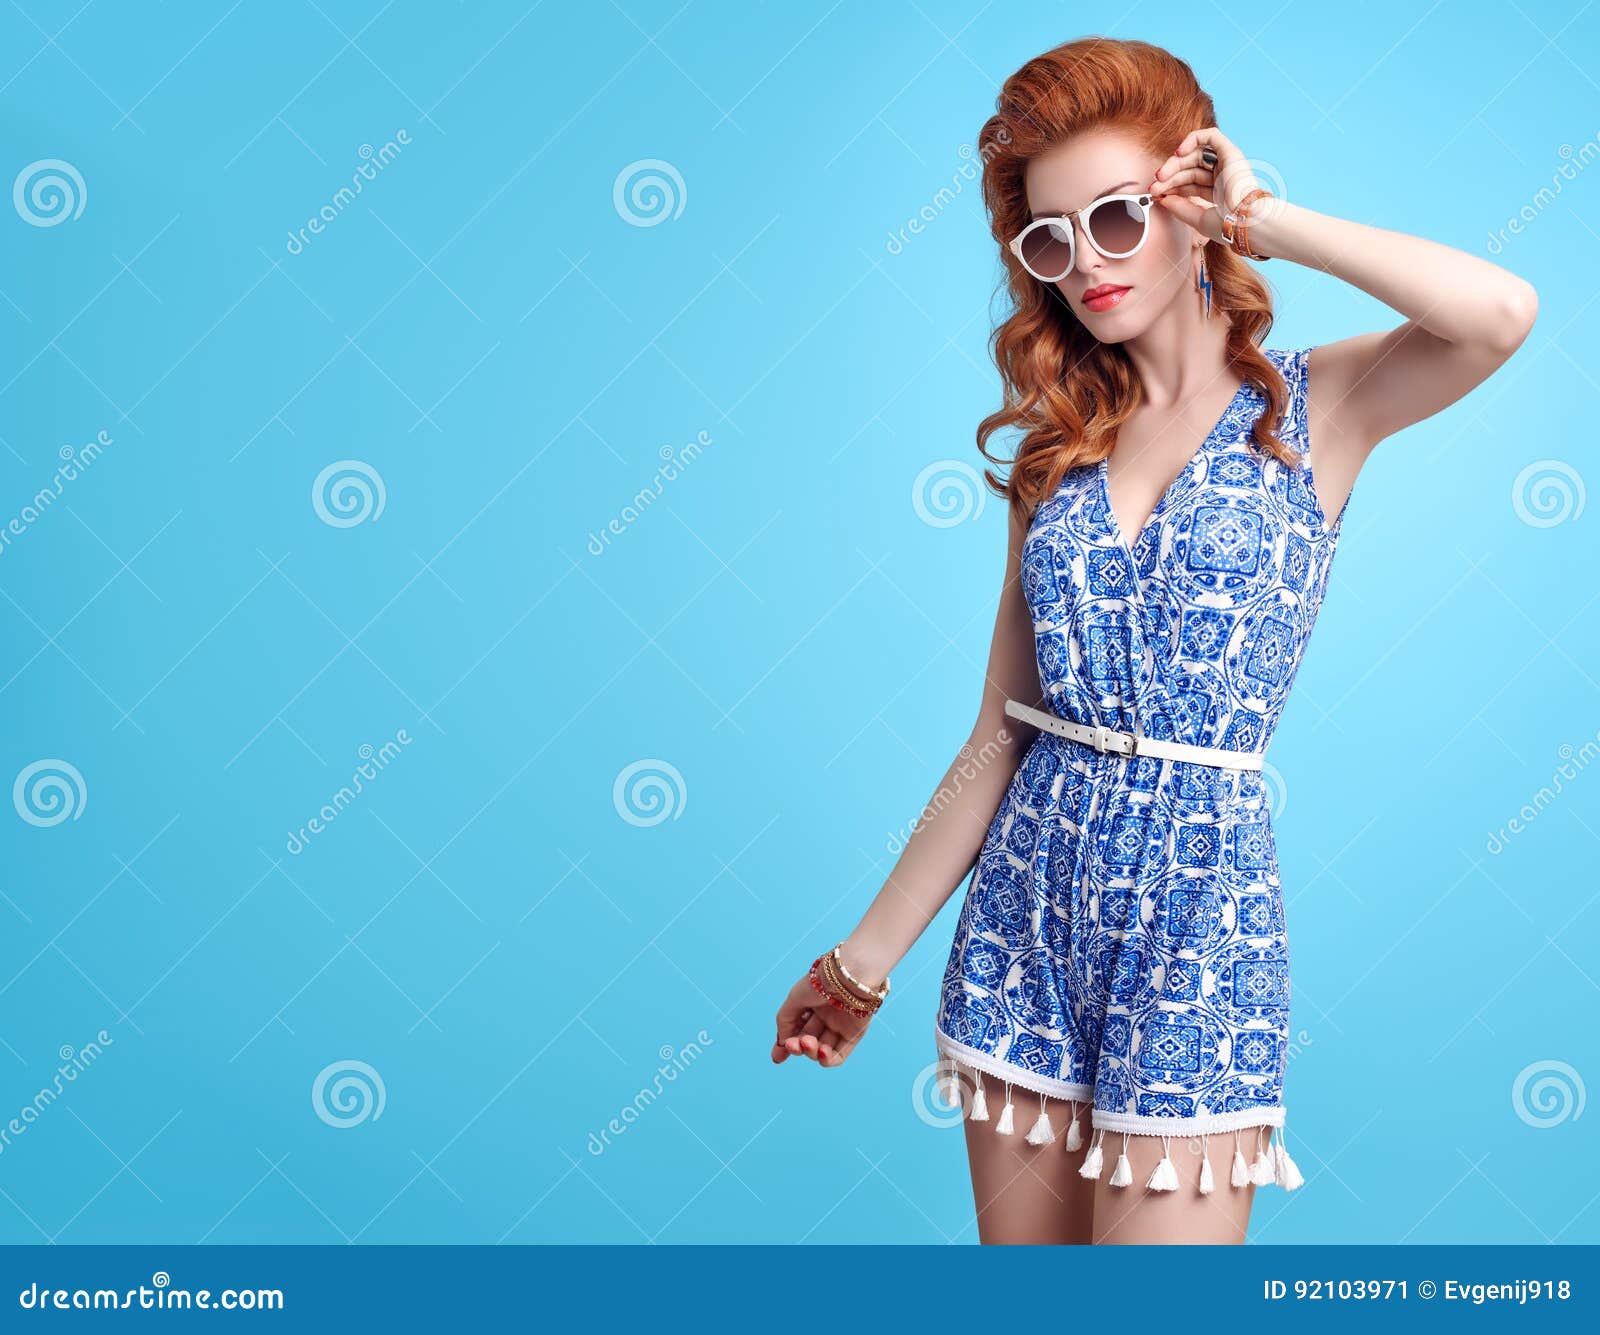 Fashion Redhead Model in Sexy Jumpsuit. Stylish Mohawk hairstyle, fashion  Sunglasses, Summer Floral Party Outfit. Beauty Woman in Trendy Summer  Dress. Glamour fashion Lady. Playful Luxury Girl on Pink Stock Photo |